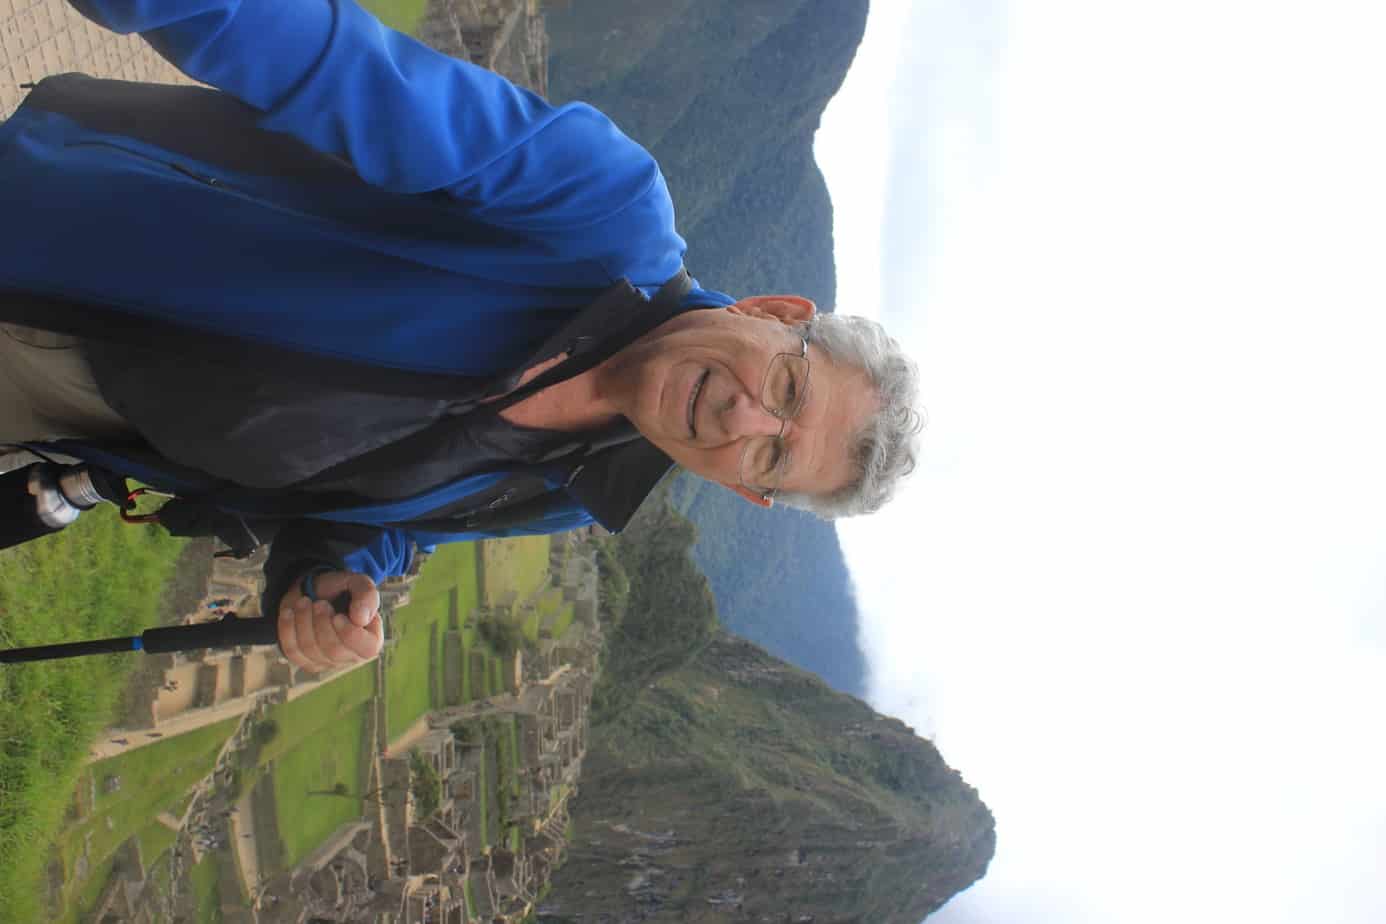 Bob T hiking, who suffered from ringing in ears